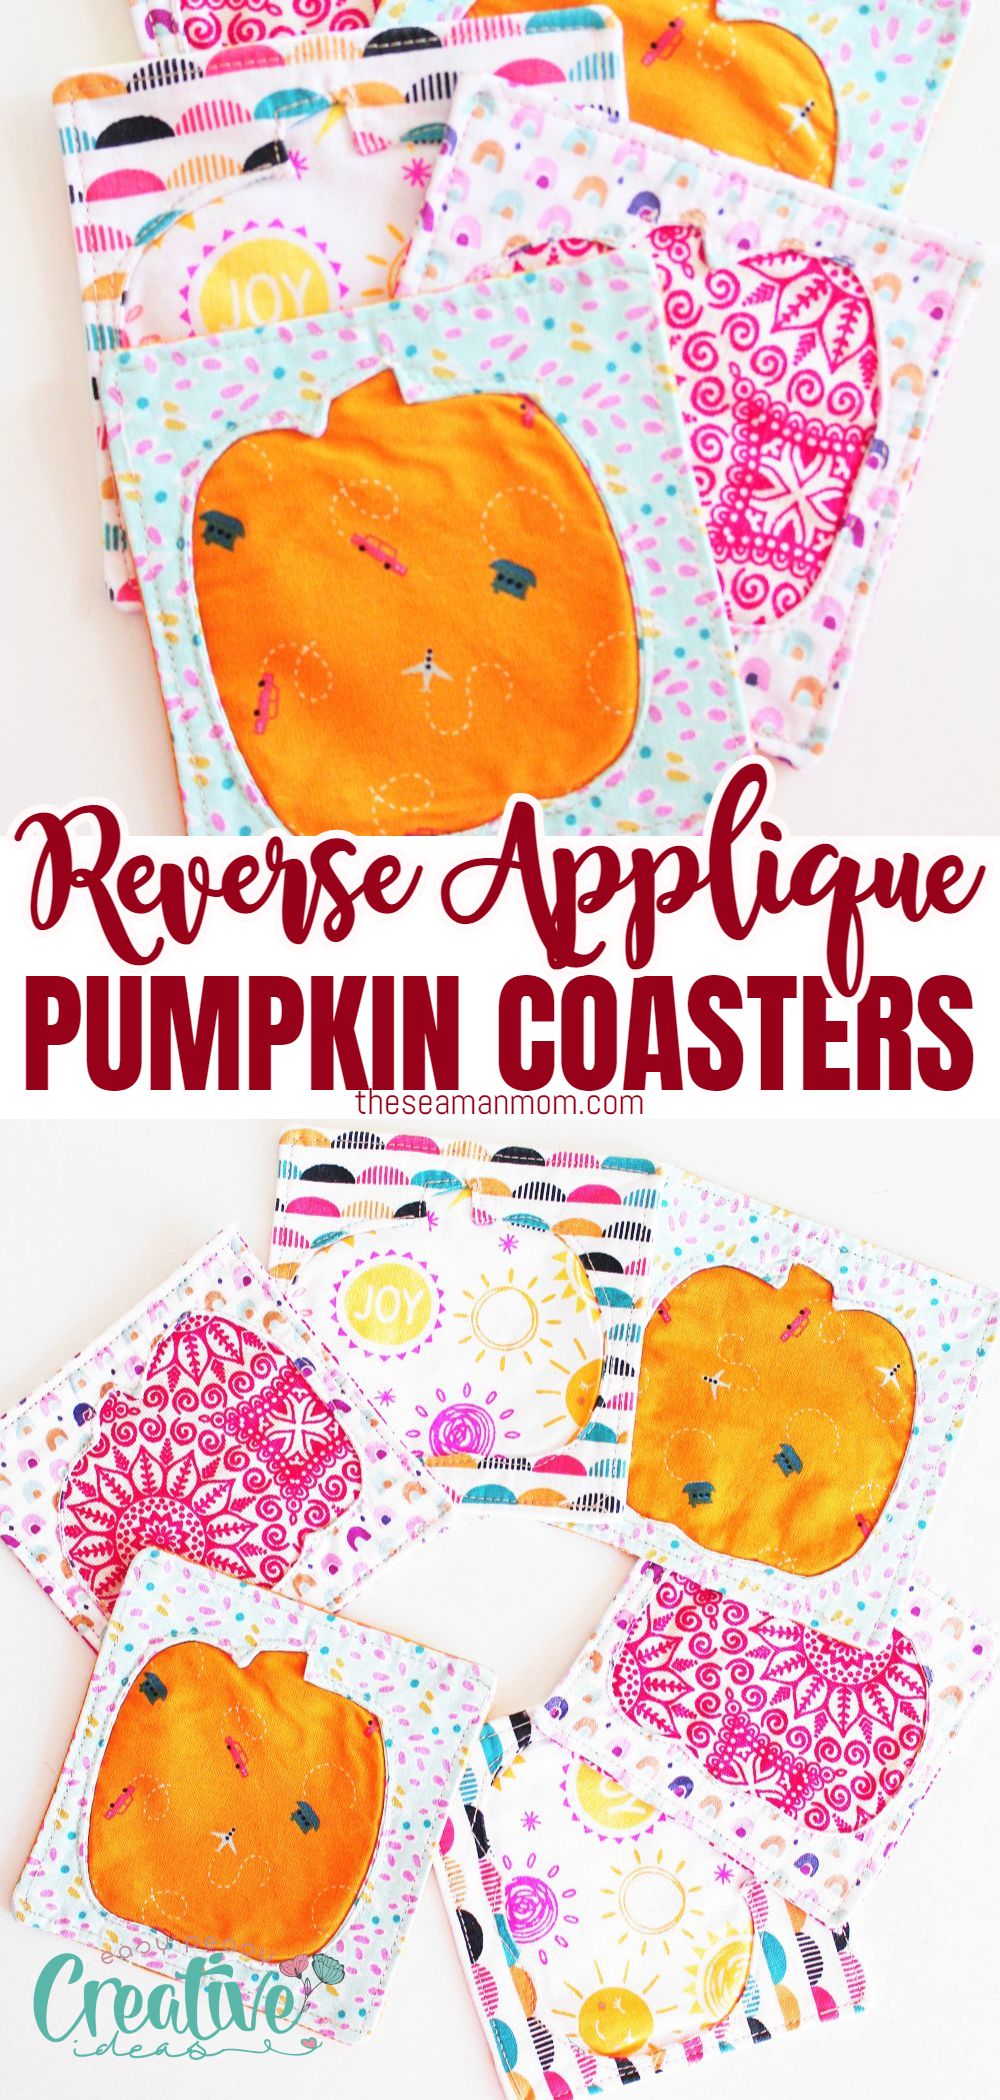 This fun reverse applique sewing tutorial will show you how to make some cute pumpkin coasters for your fall table décor. This easy applique technique is a great way to add a little bit of color and pattern to your home for the autumn season. Plus, they make a great gift for any hostess or pumpkin lover in your life! Great project for scraps, these cute fabric coasters would make a lovely addition to a fall party! via @petroneagu